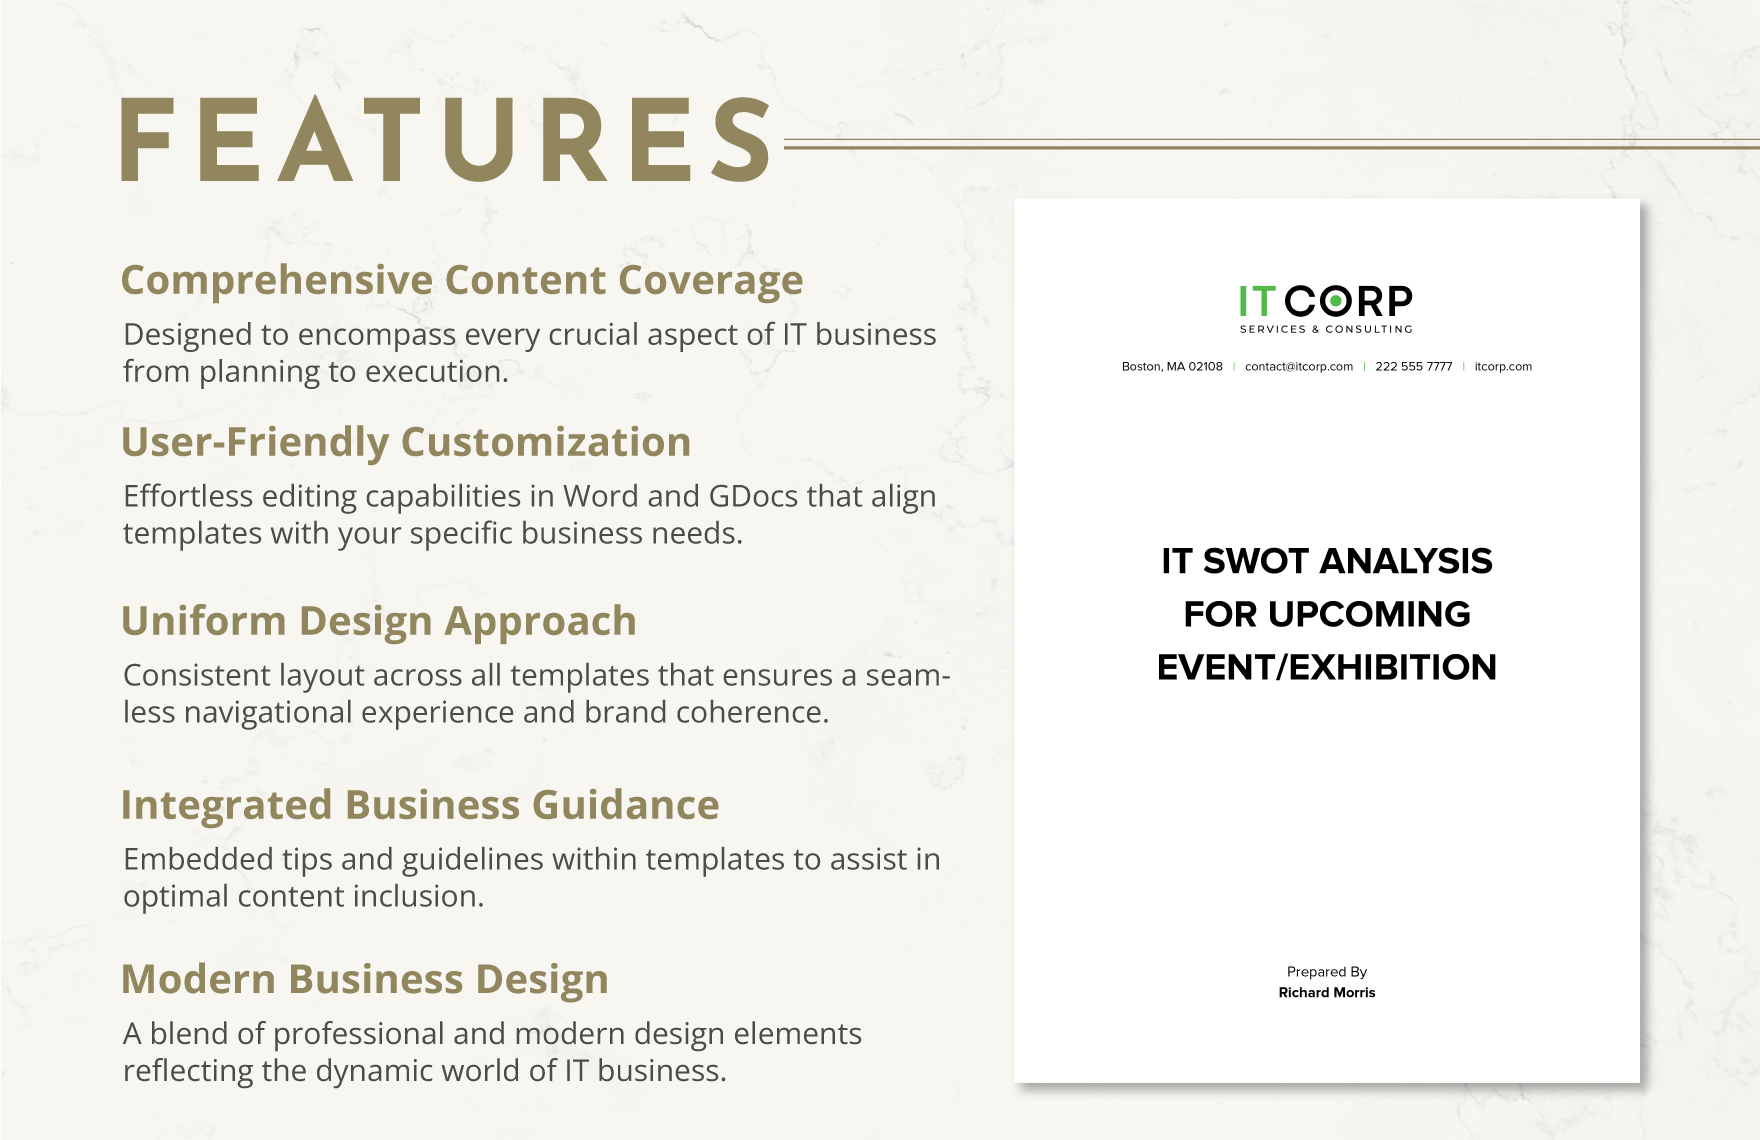 IT SWOT Analysis for Upcoming Event/Exhibition Template